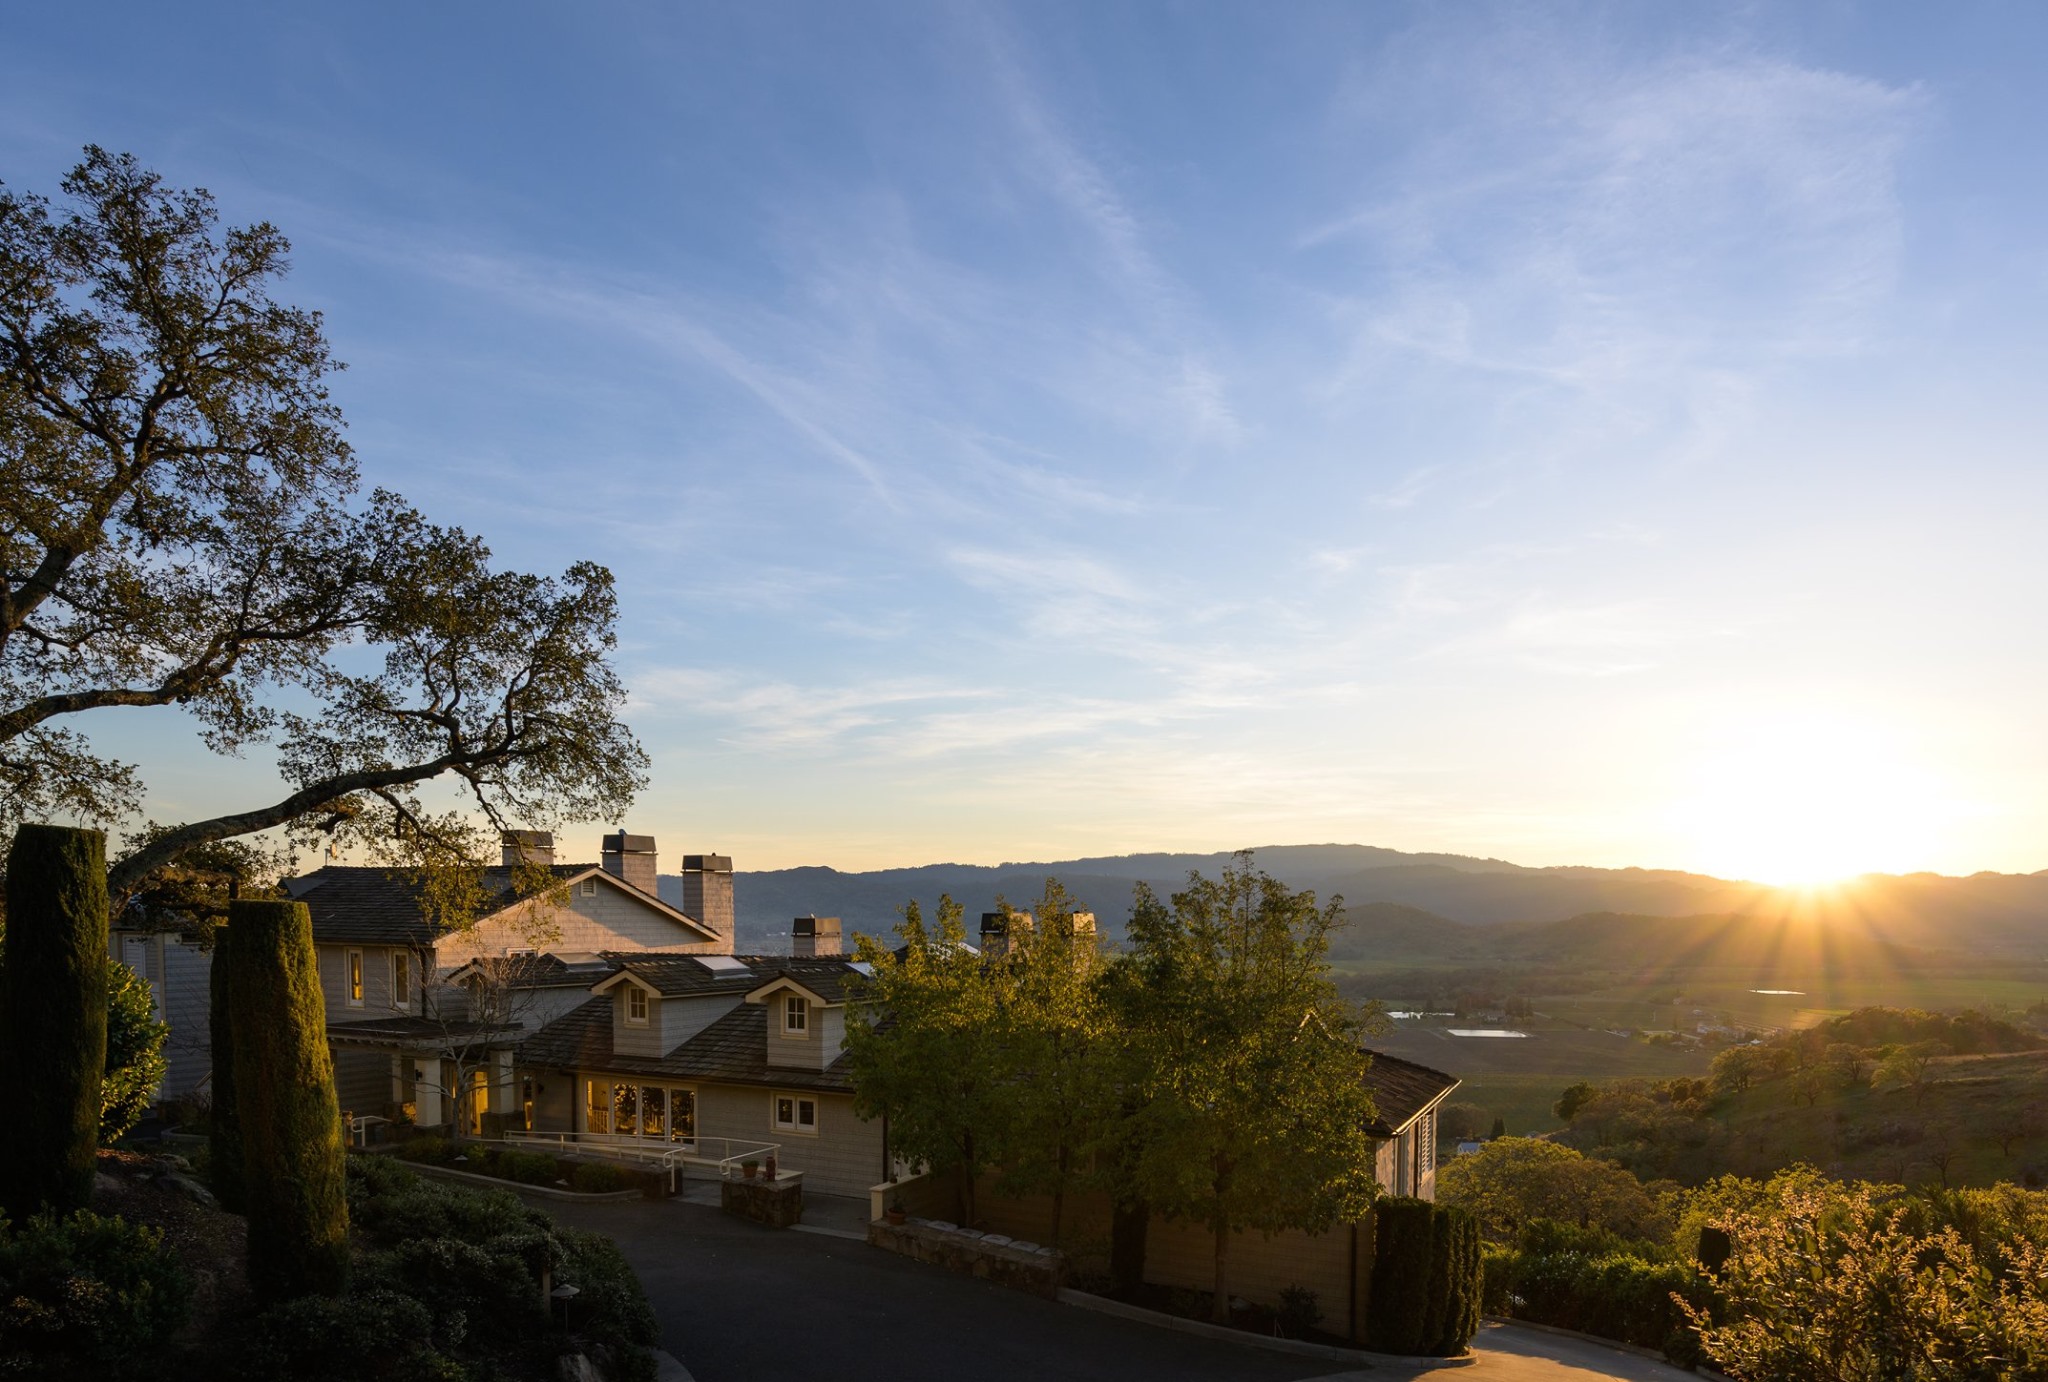 The sun is setting over Poetry Inn in Napa Valley.